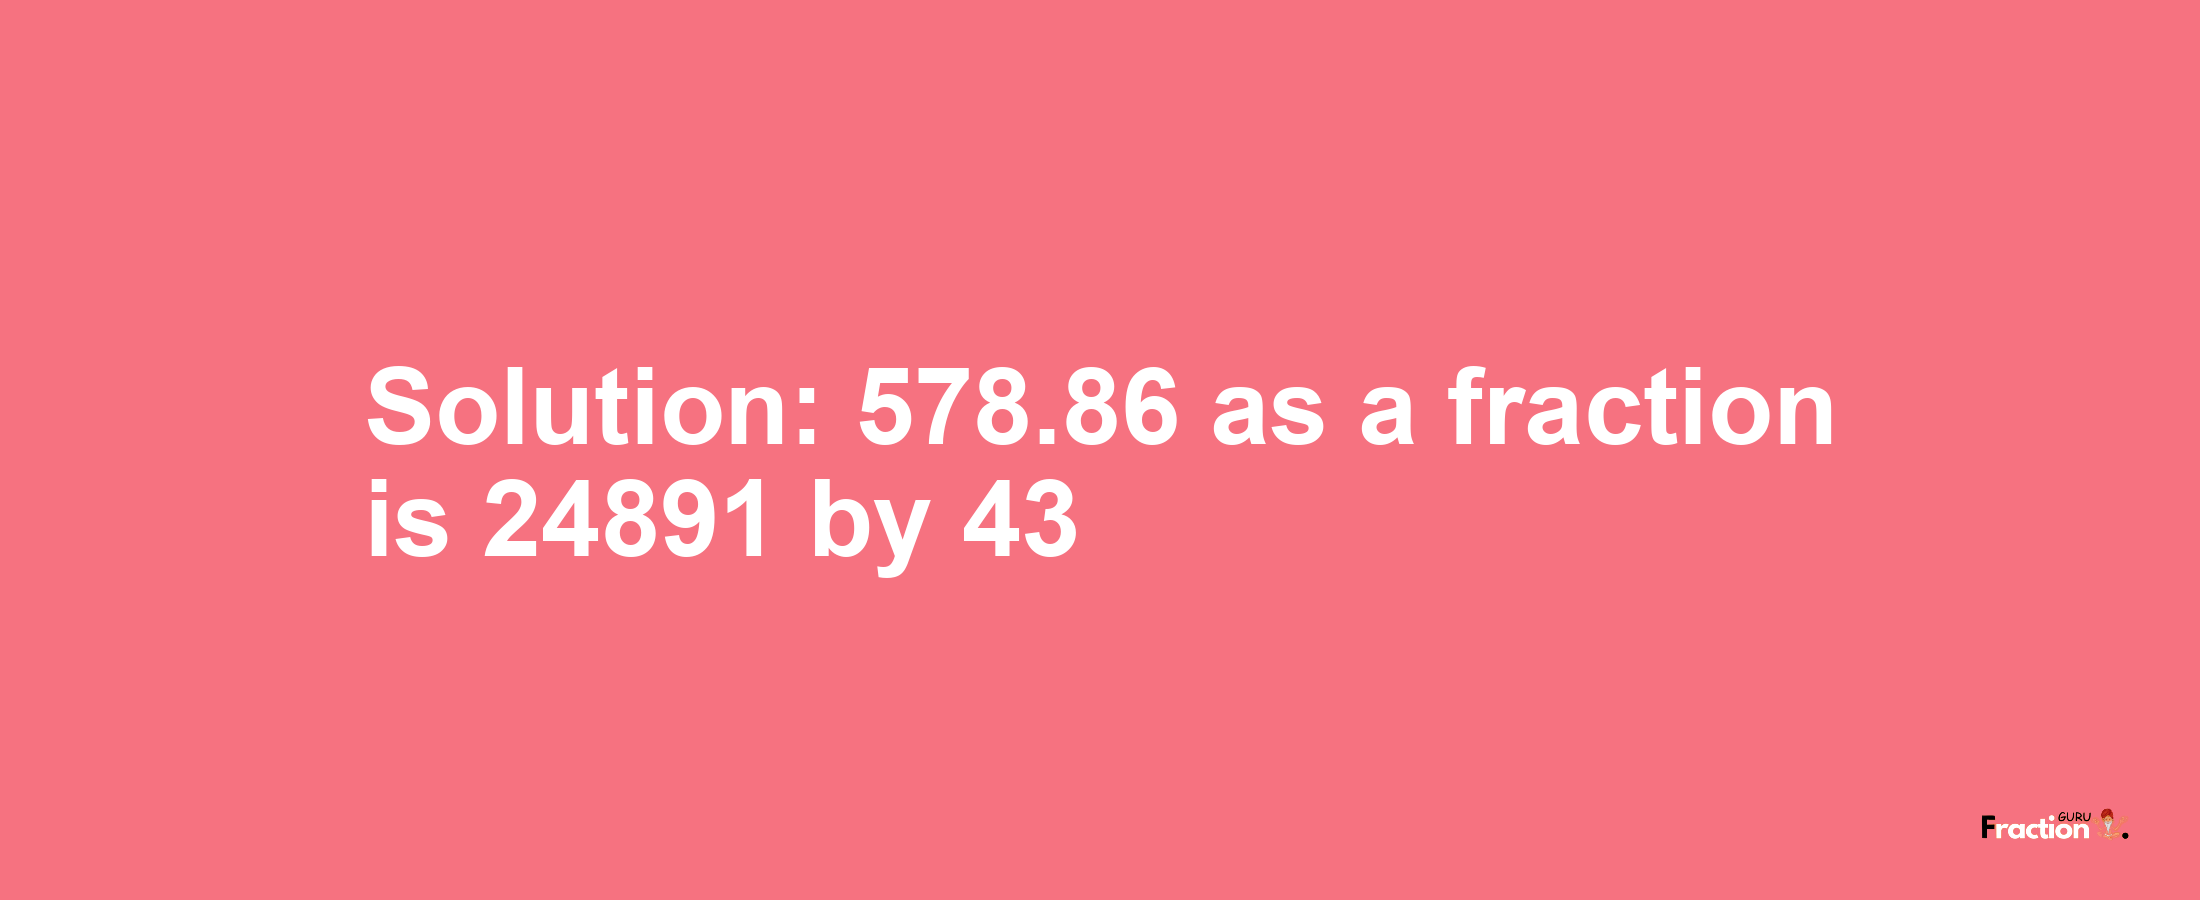 Solution:578.86 as a fraction is 24891/43